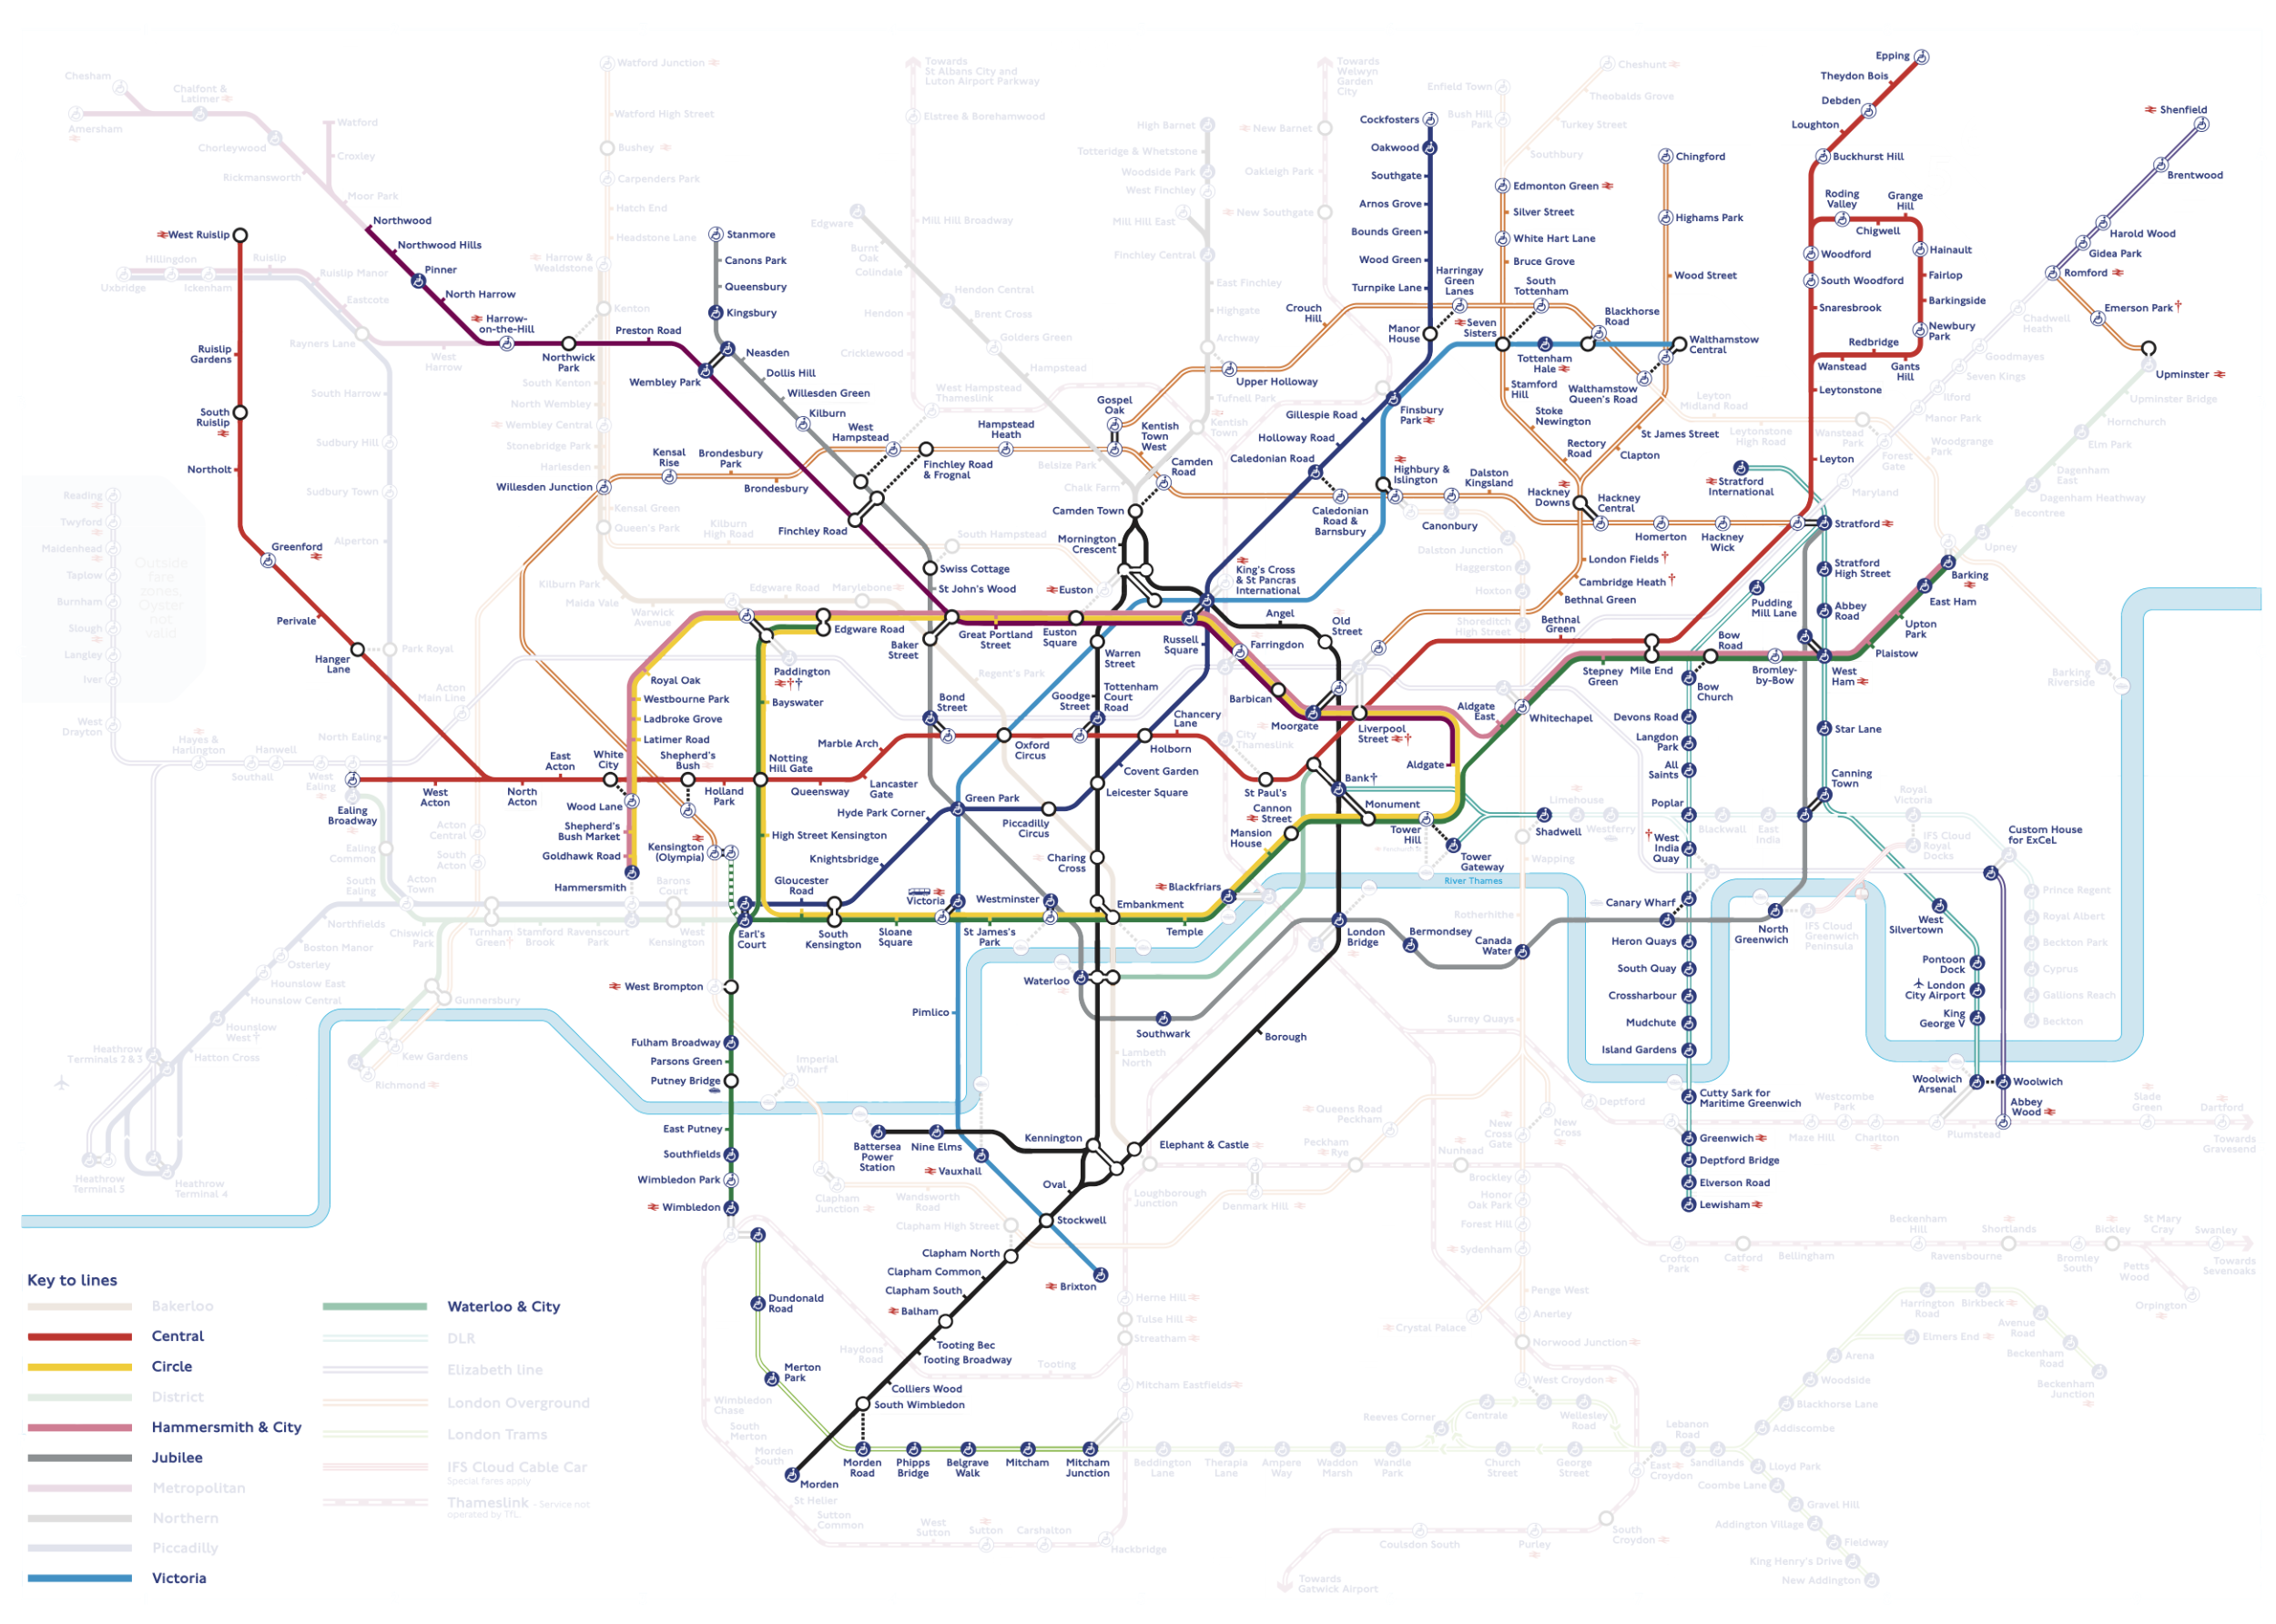 The map showing the parts of the TfL network that I've walked now has the top right bit filled in.